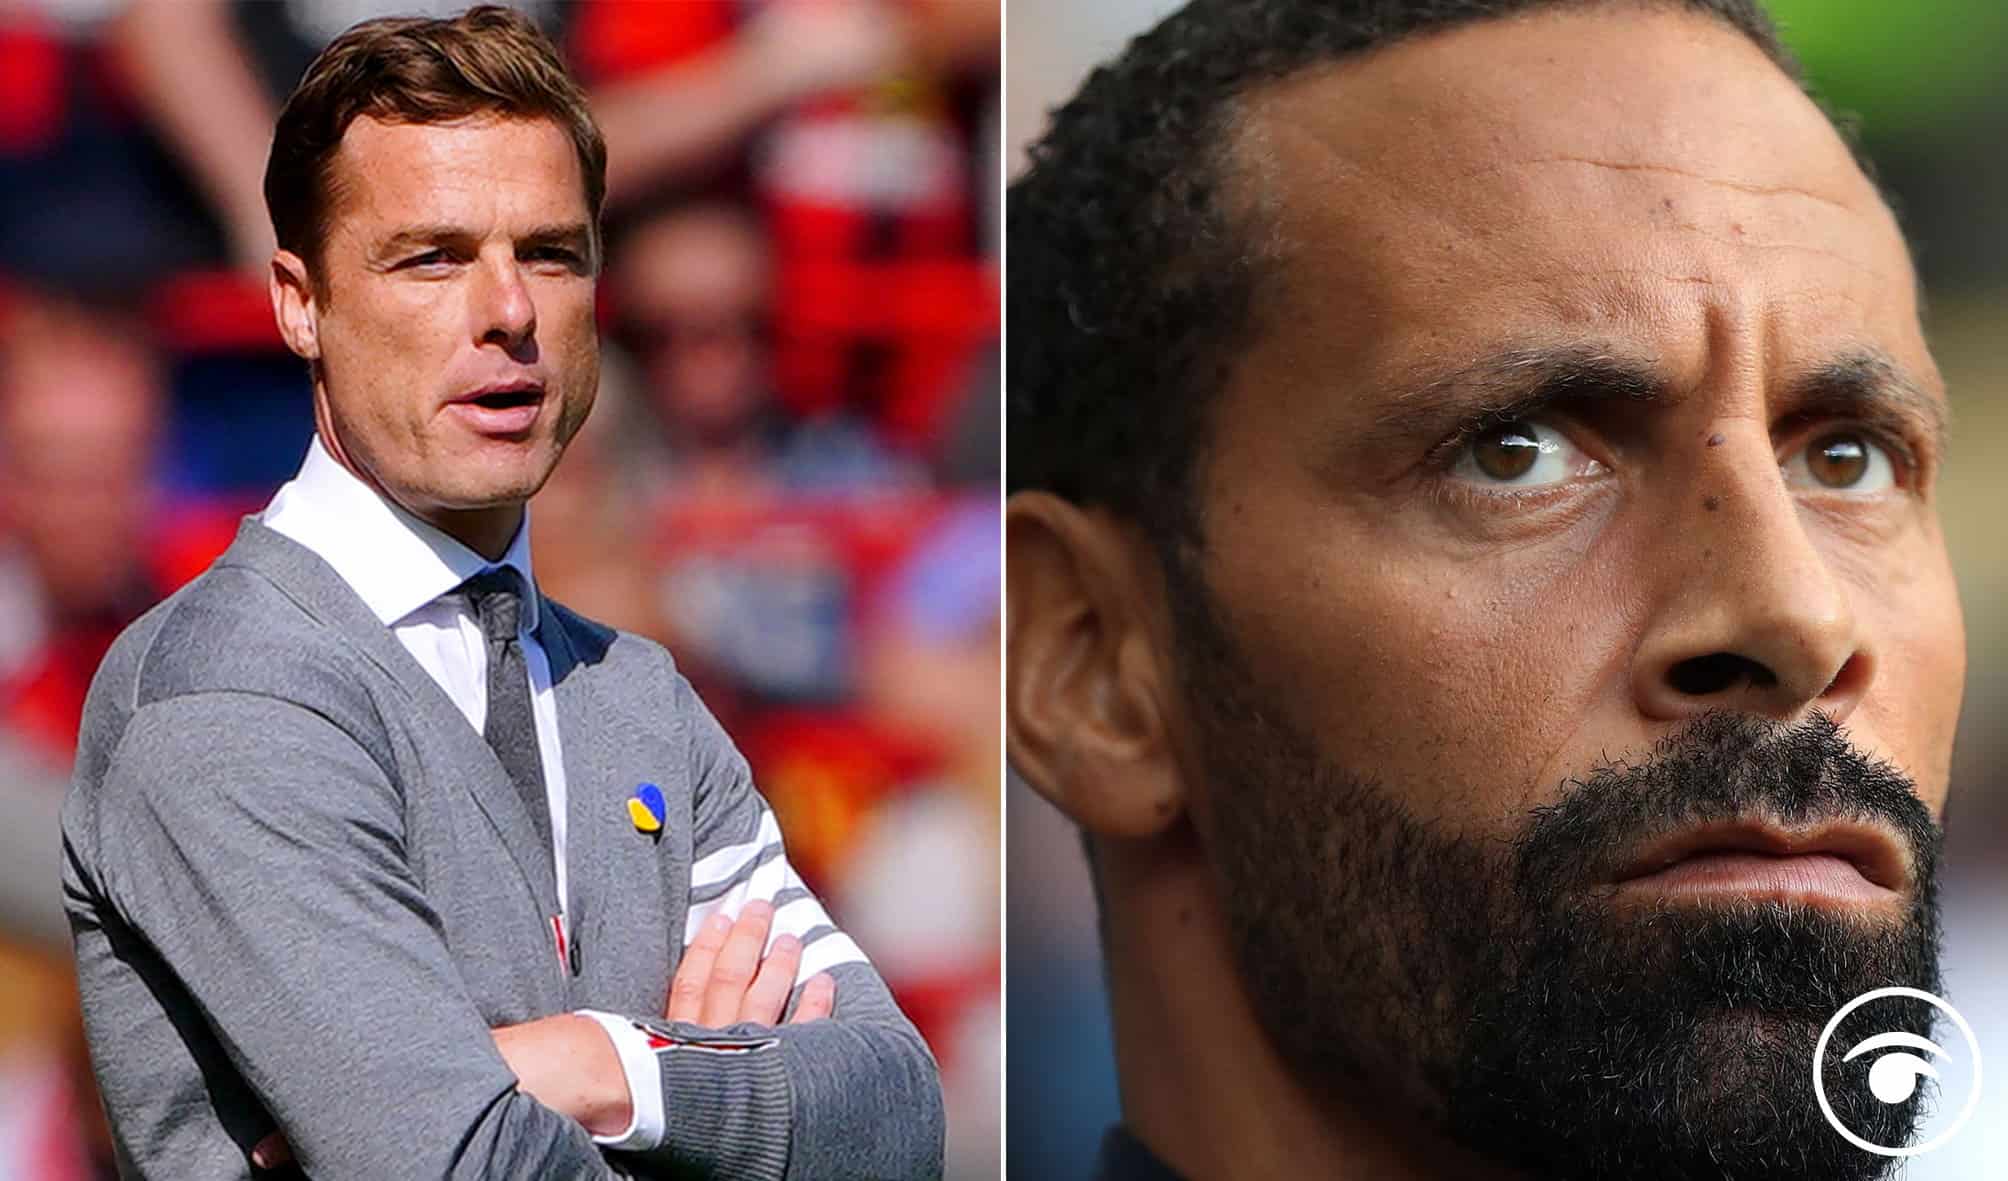 Rio Ferdinand slams Bournemouth after sacking manager after Liverpool loss as Streets mash-up goes viral